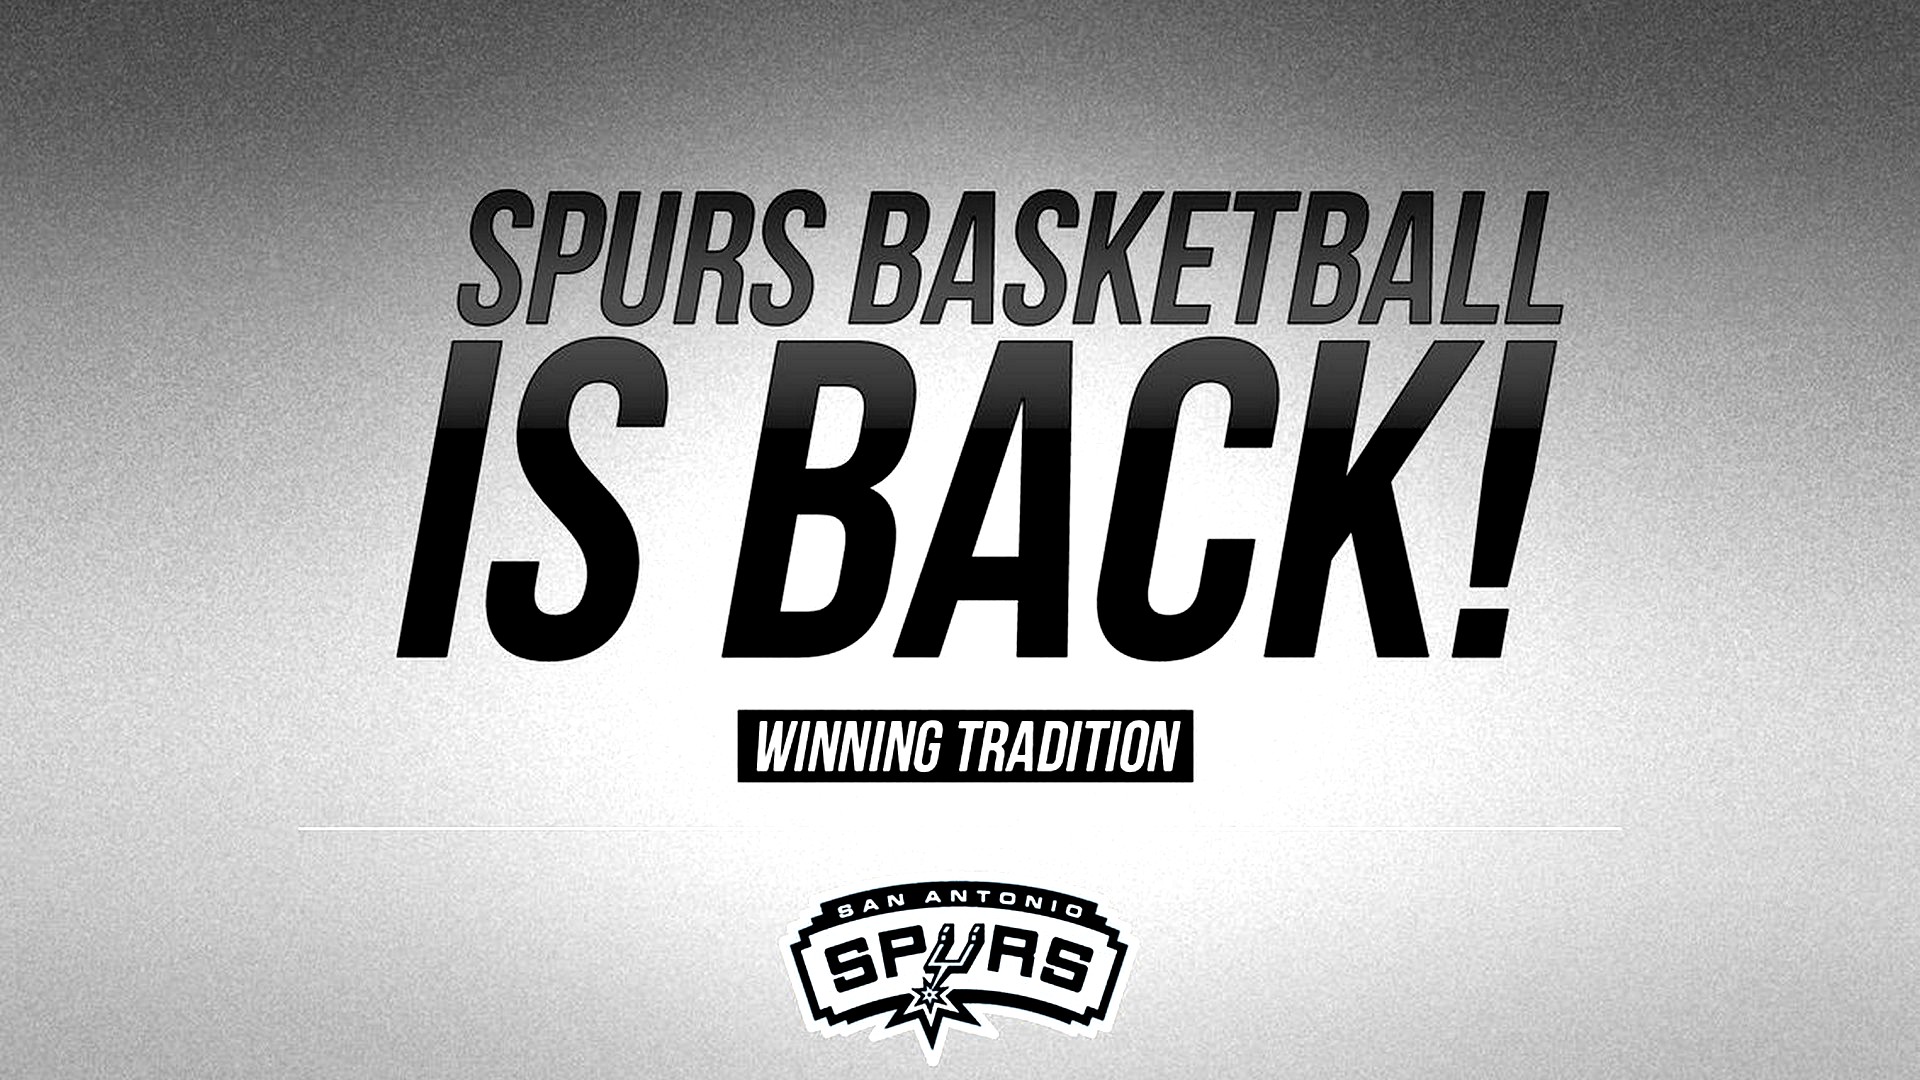 Windows Wallpaper San Antonio Spurs with high-resolution 1920x1080 pixel. You can use this wallpaper for your Desktop Computer Backgrounds, Windows or Mac Screensavers, iPhone Lock screen, Tablet or Android and another Mobile Phone device